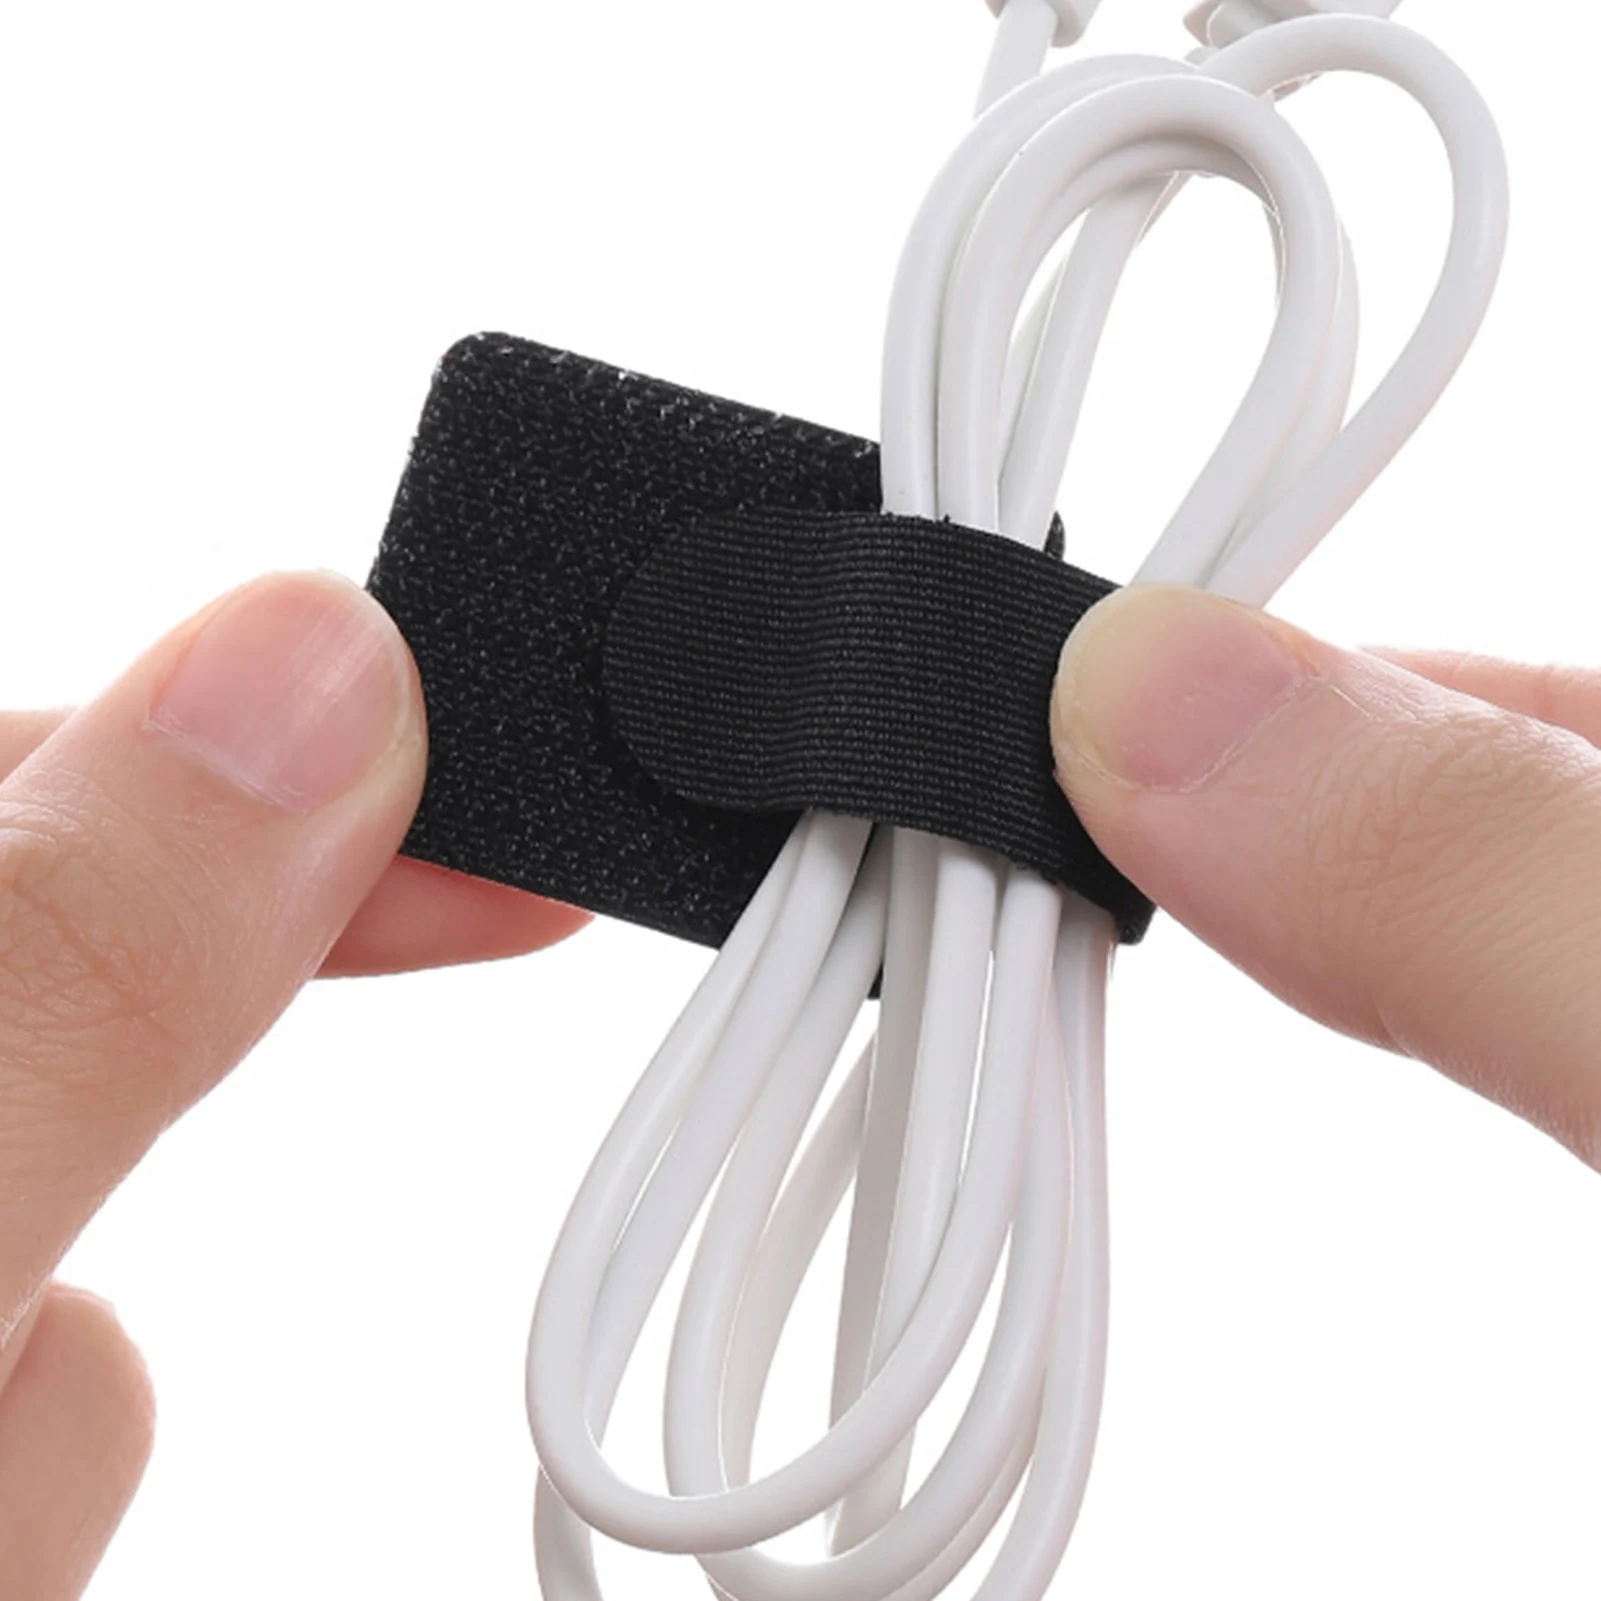 

Cable Ties Reusable Zip Ties Wire Management Cord Ties Wire Management Cord Organizer For Desk Keep Tight And Neat Tie Wraps For